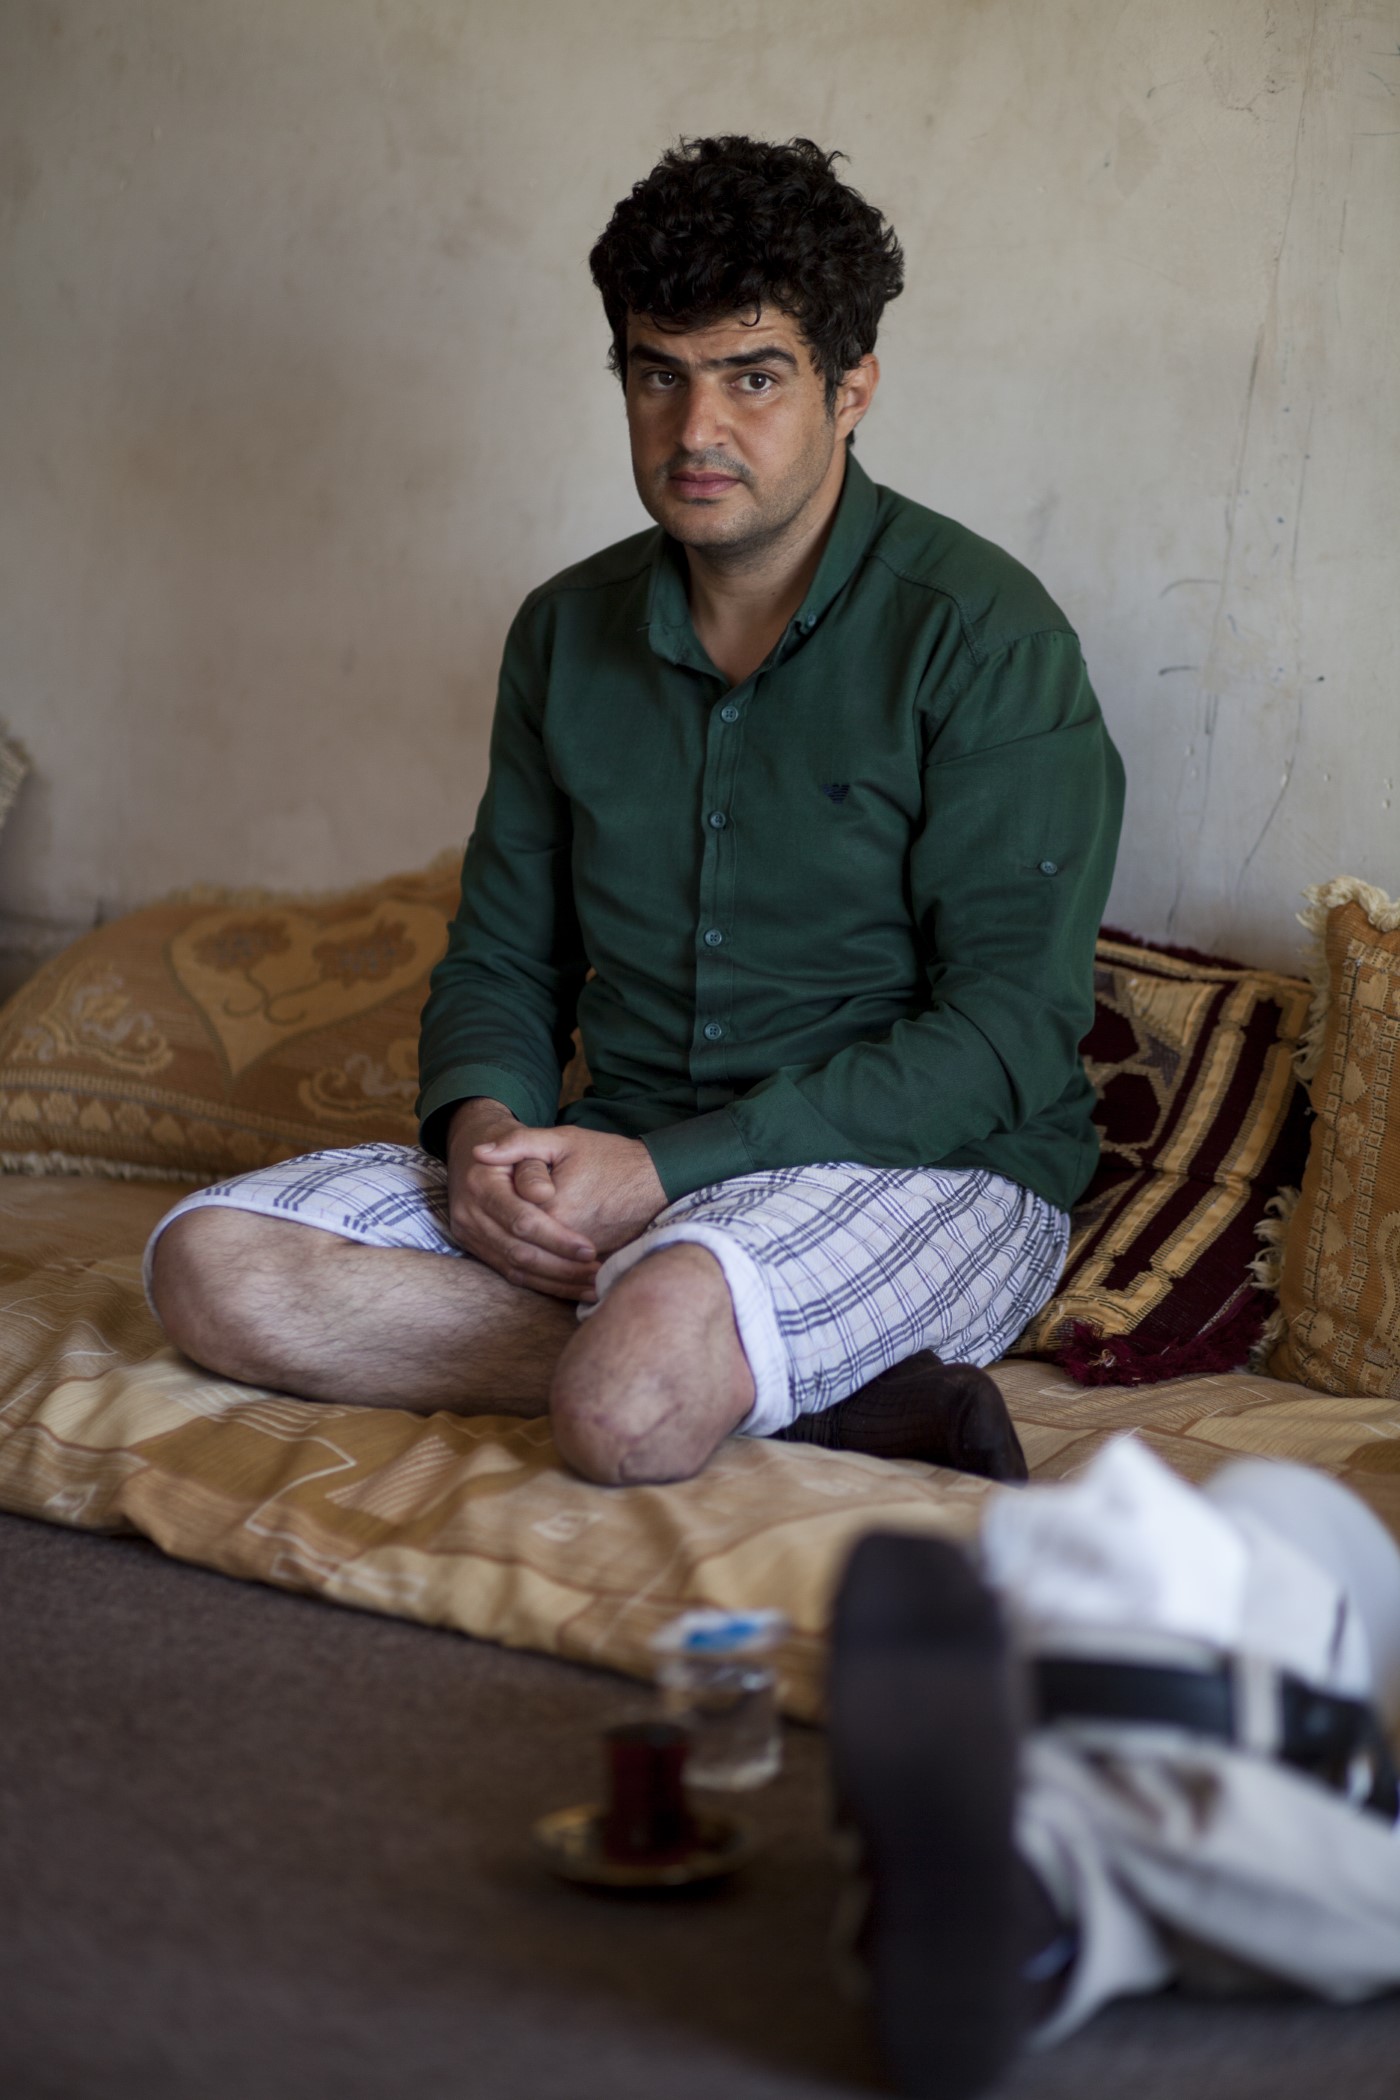 Saman (33), former Peshmerga and doctor, shows his amputated leg following the explosion of an Islamic State mine. He was coming back from rescuing two wounded Peshmergas in an ambulance near Mosul in 2016. He was the only survivor. Pramagran, Kurdistan, Iraq. May 14, 2017